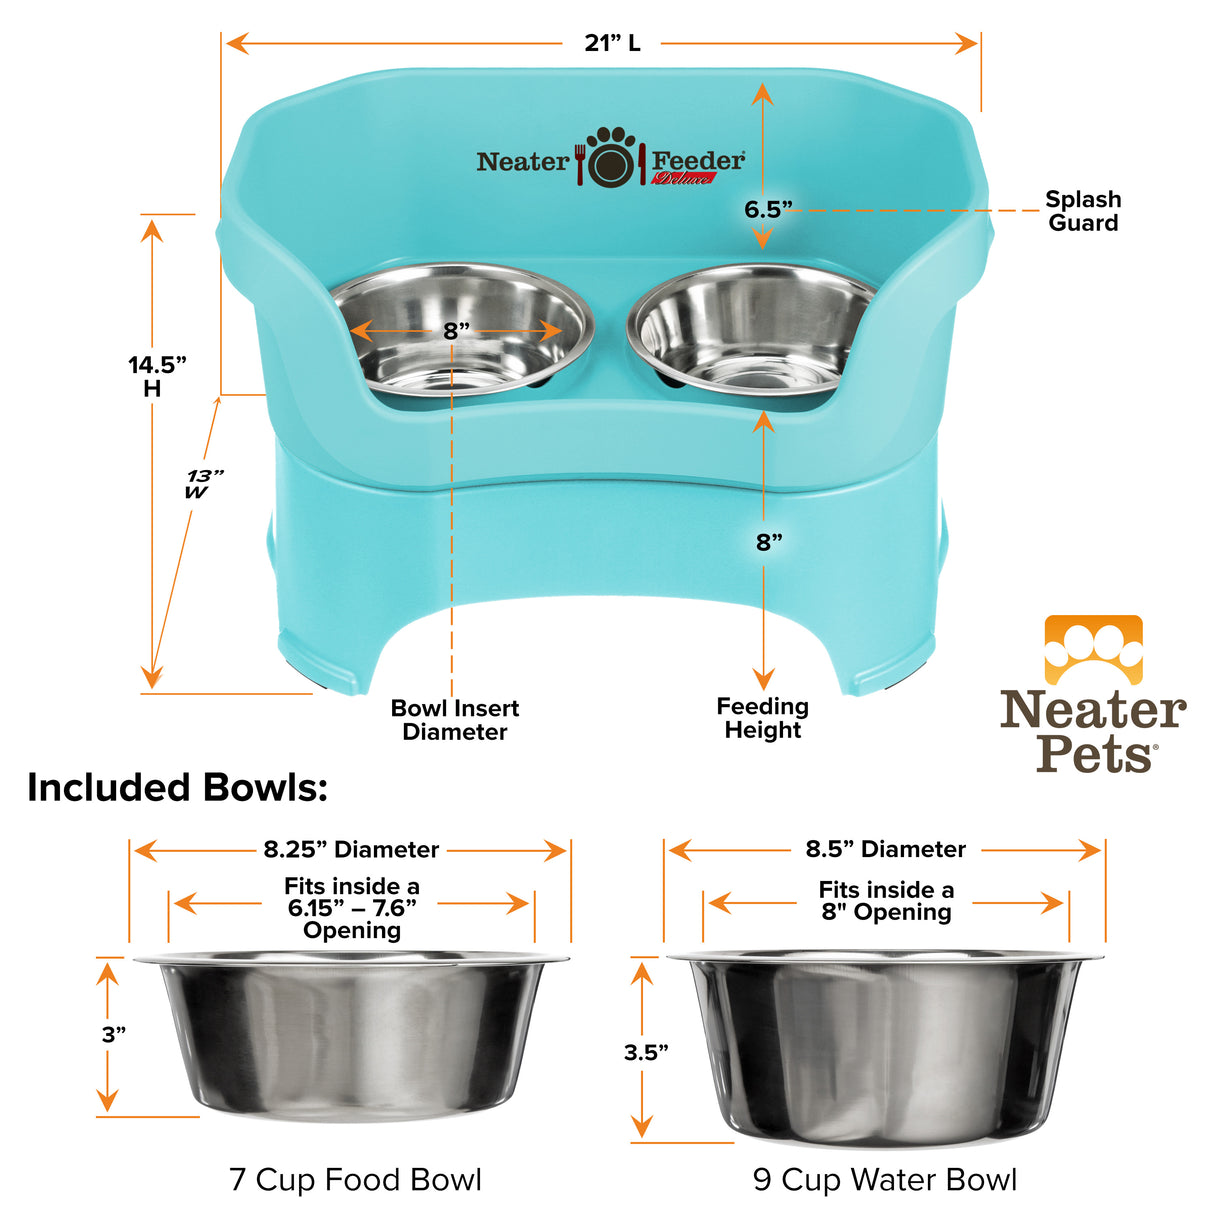 Deluxe Aqua Large Dog Neater Feeder and Bowl dimensions